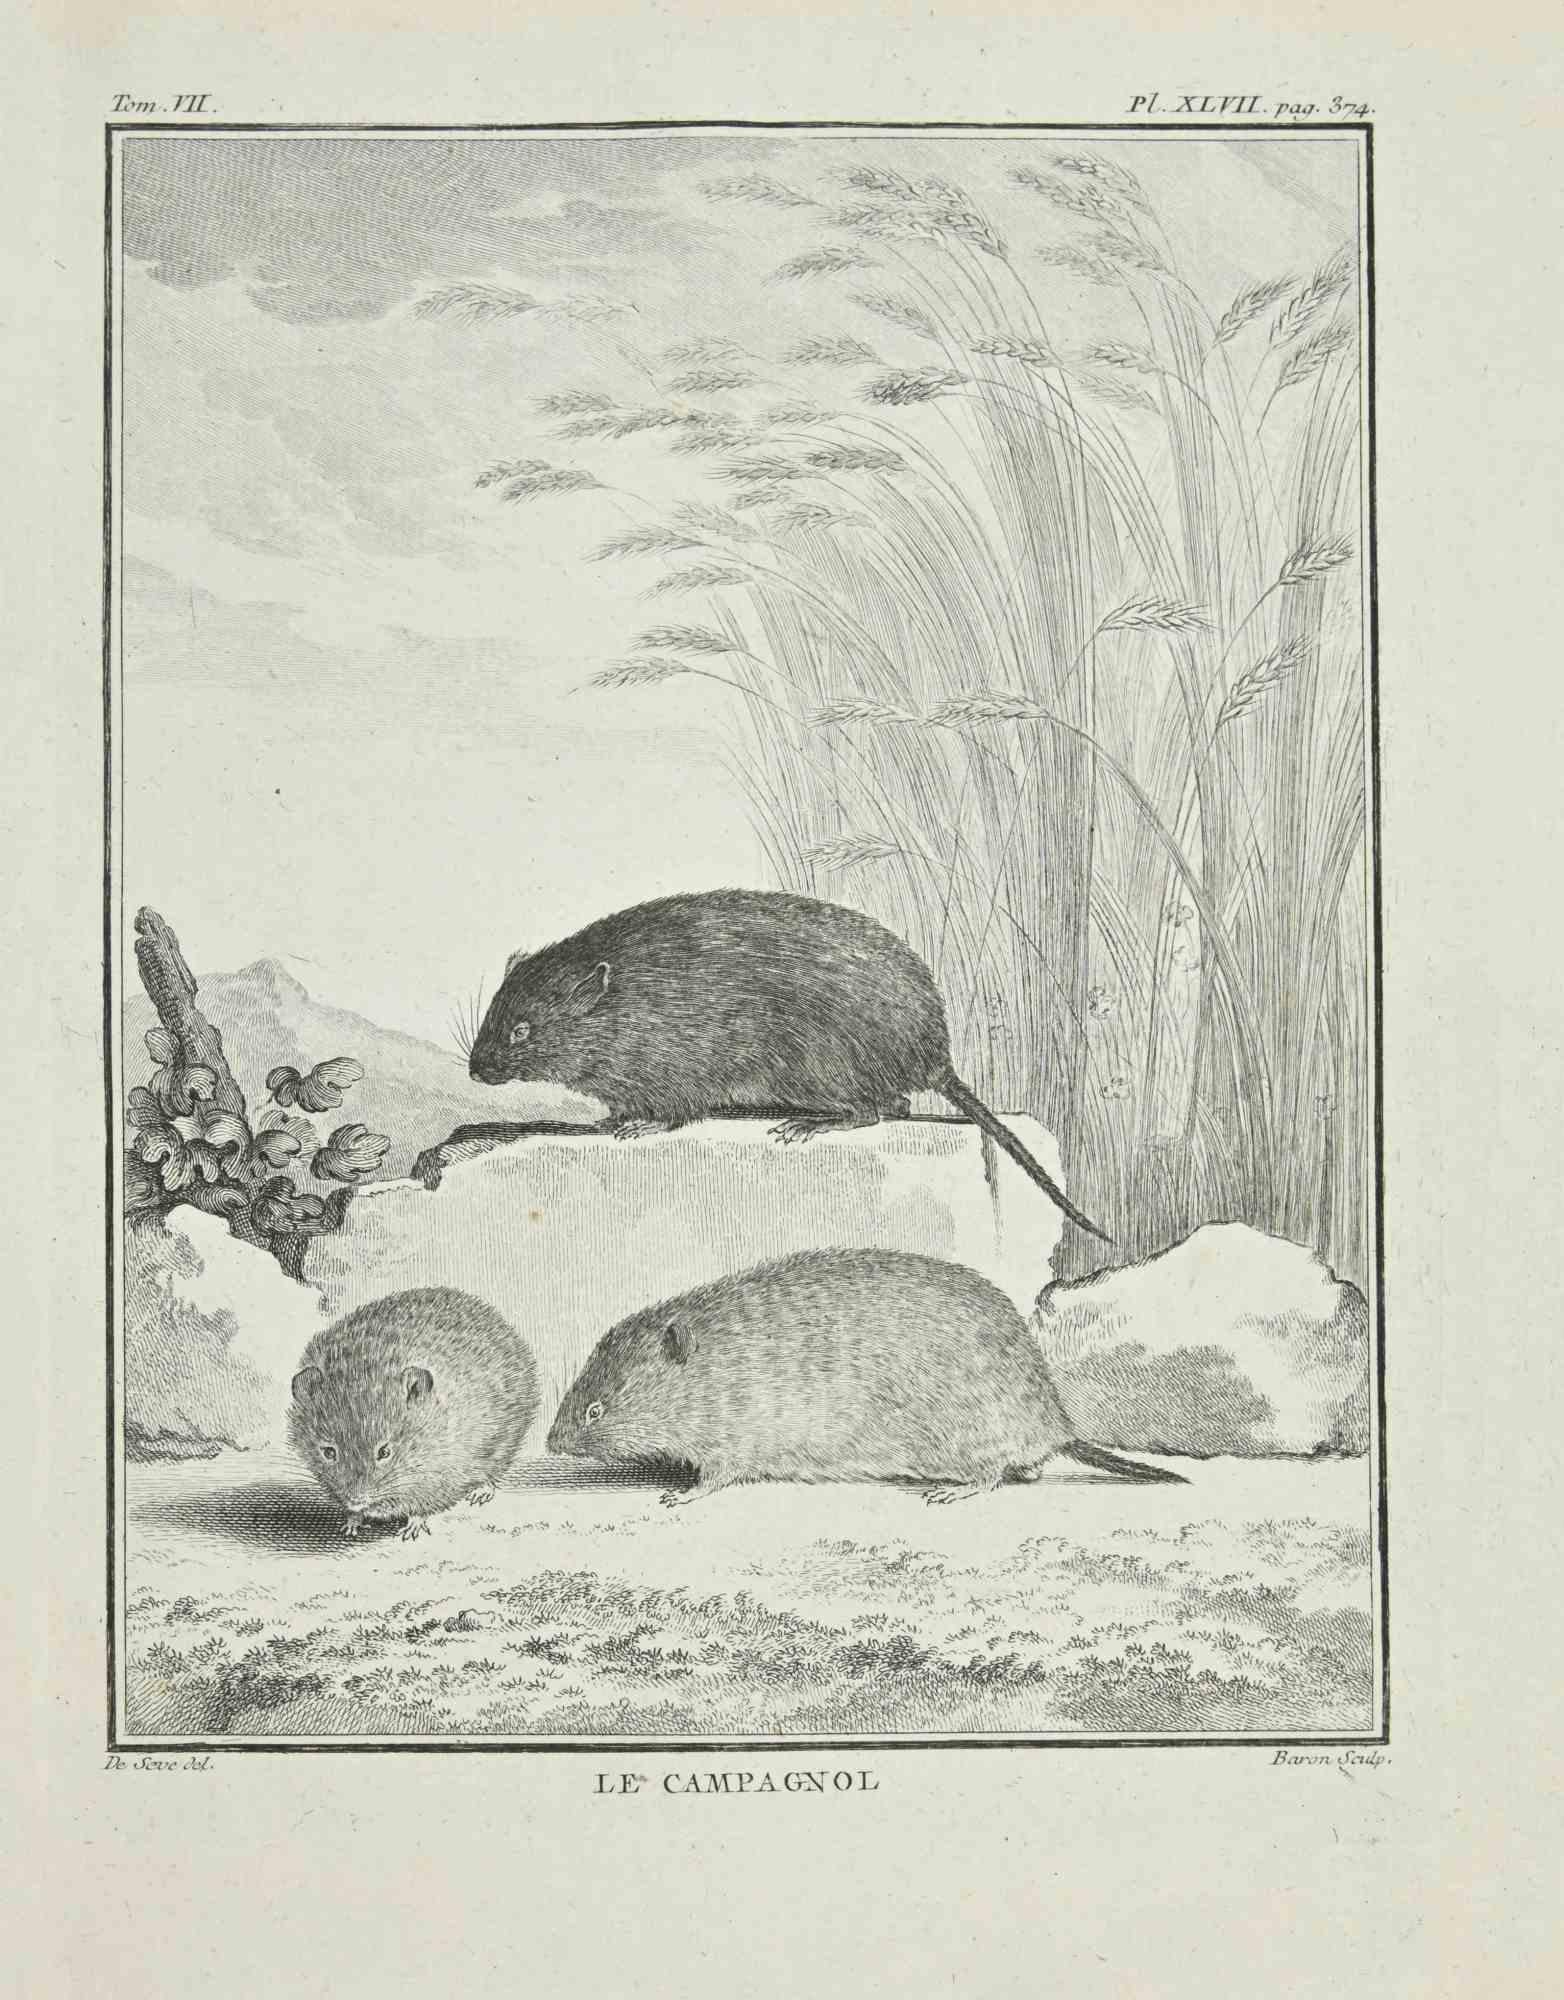 Le Campagnol is an etching realized by Jacques Baron in 1771.

It belongs to the suite "Histoire Naturelle de Buffon".

The Artist's signature is engraved lower right.

Good conditions.